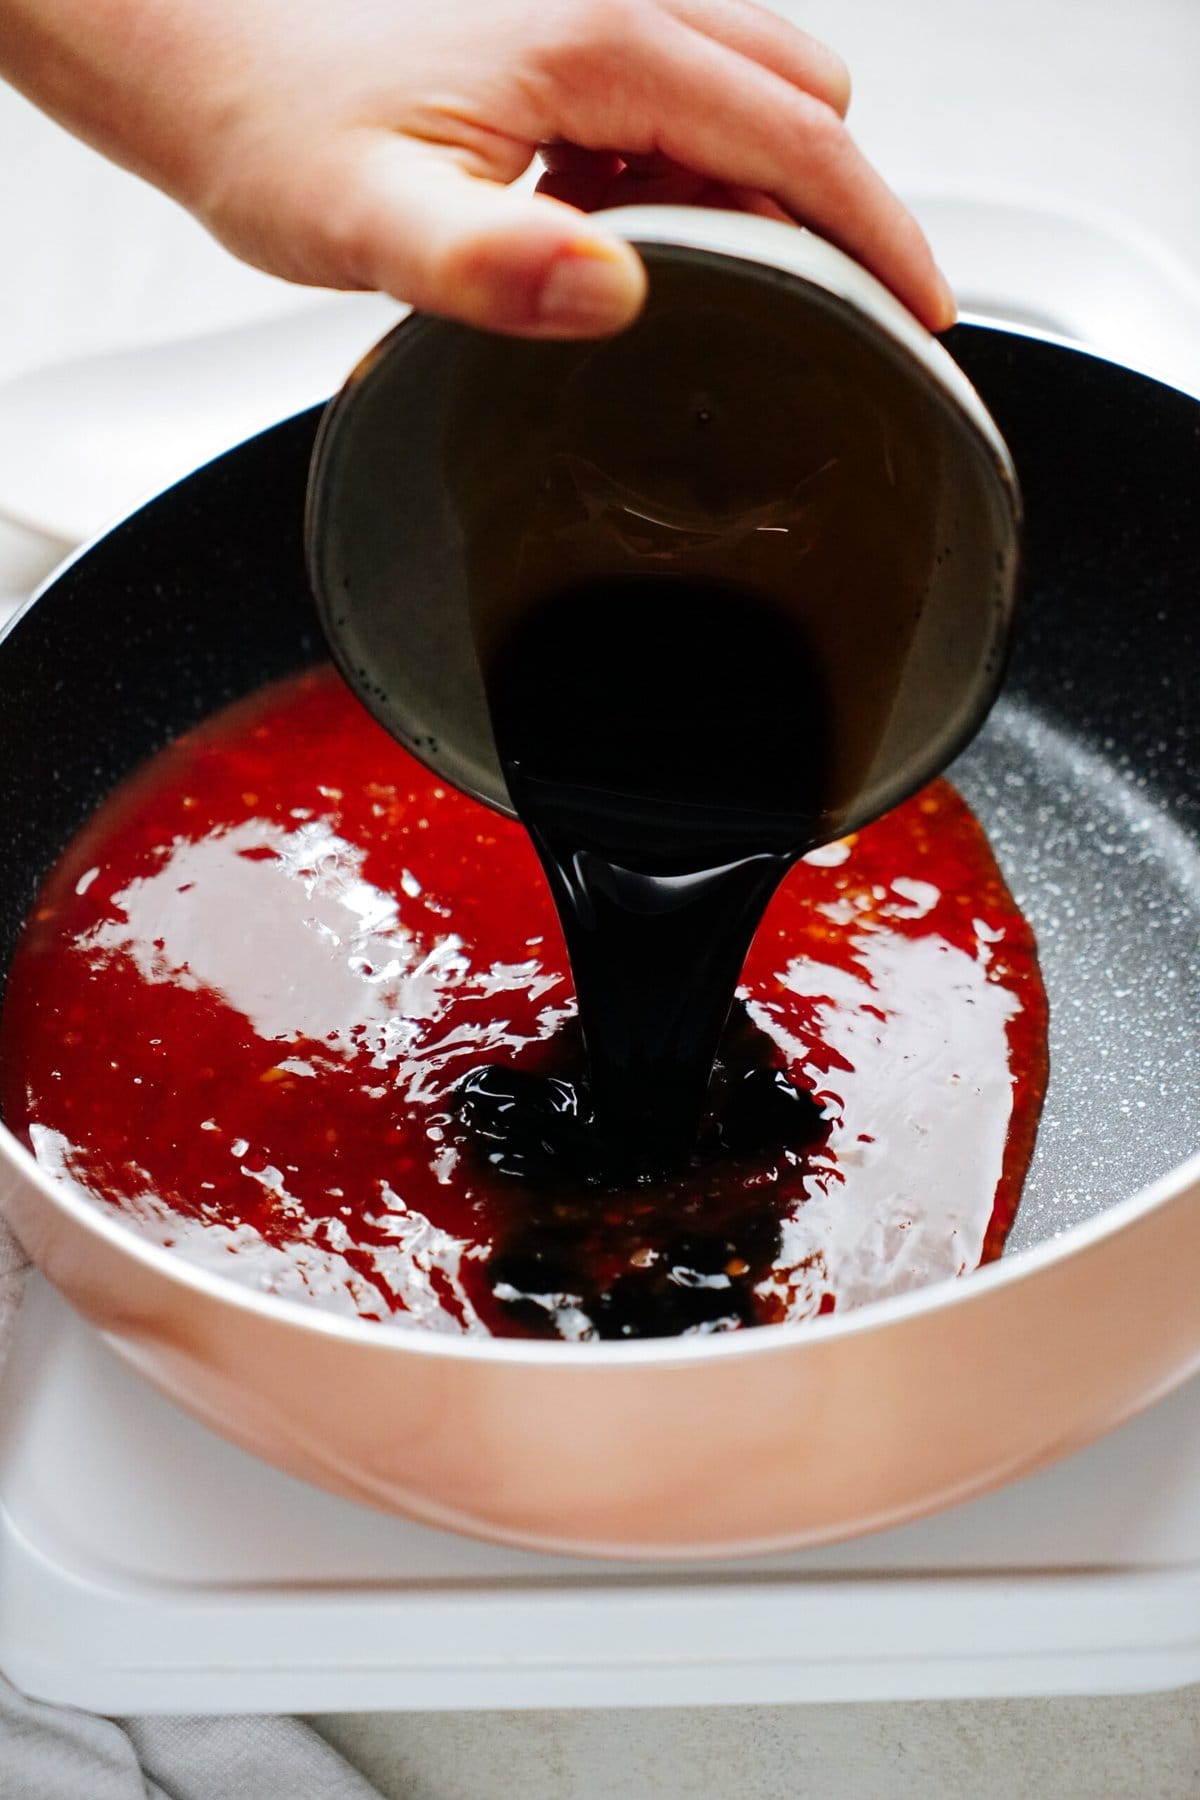 A hand pours a dark liquid into a frying pan containing a red sauce.